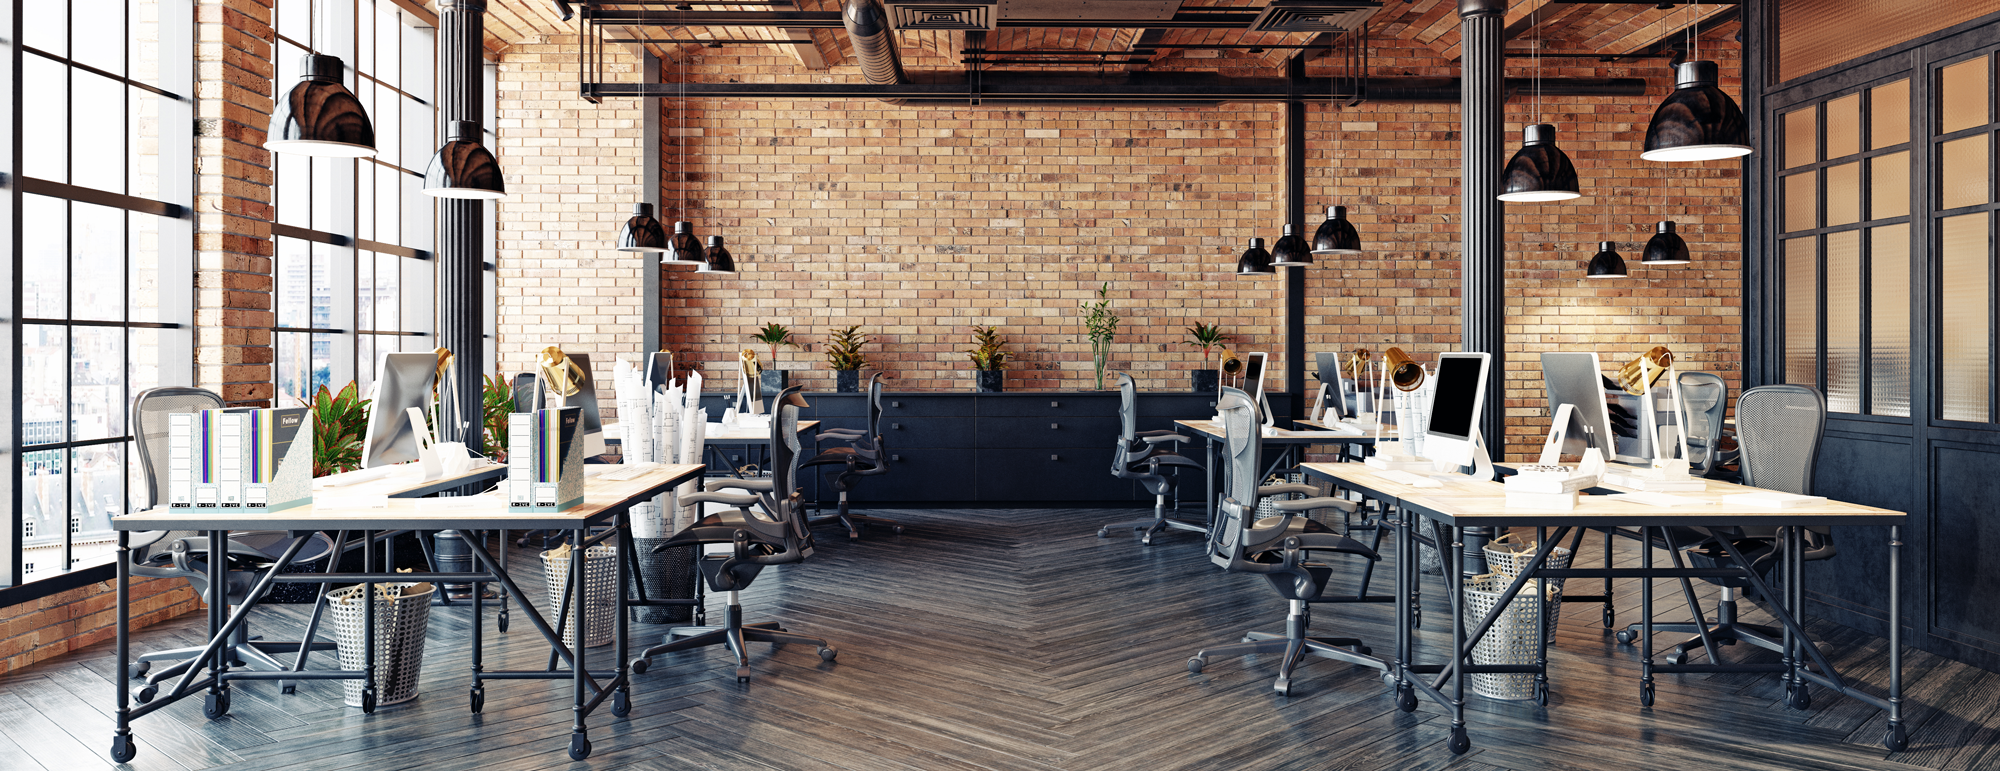 Creating a Modern Industrial Office Design That Works